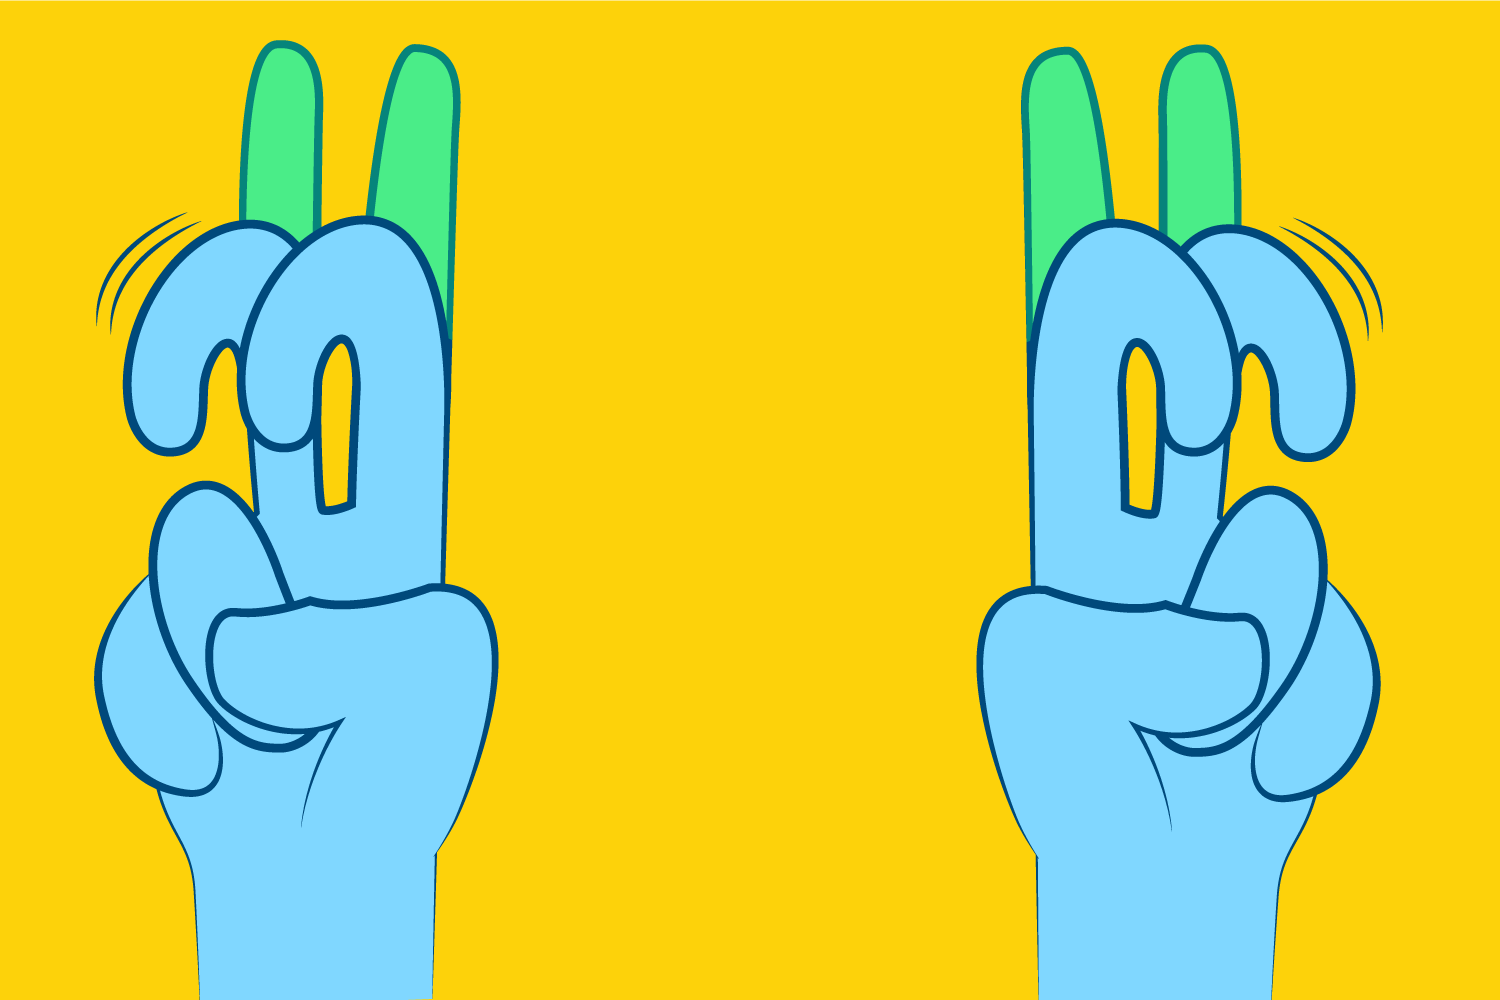 An illustration of two hands doing air quotation marks.